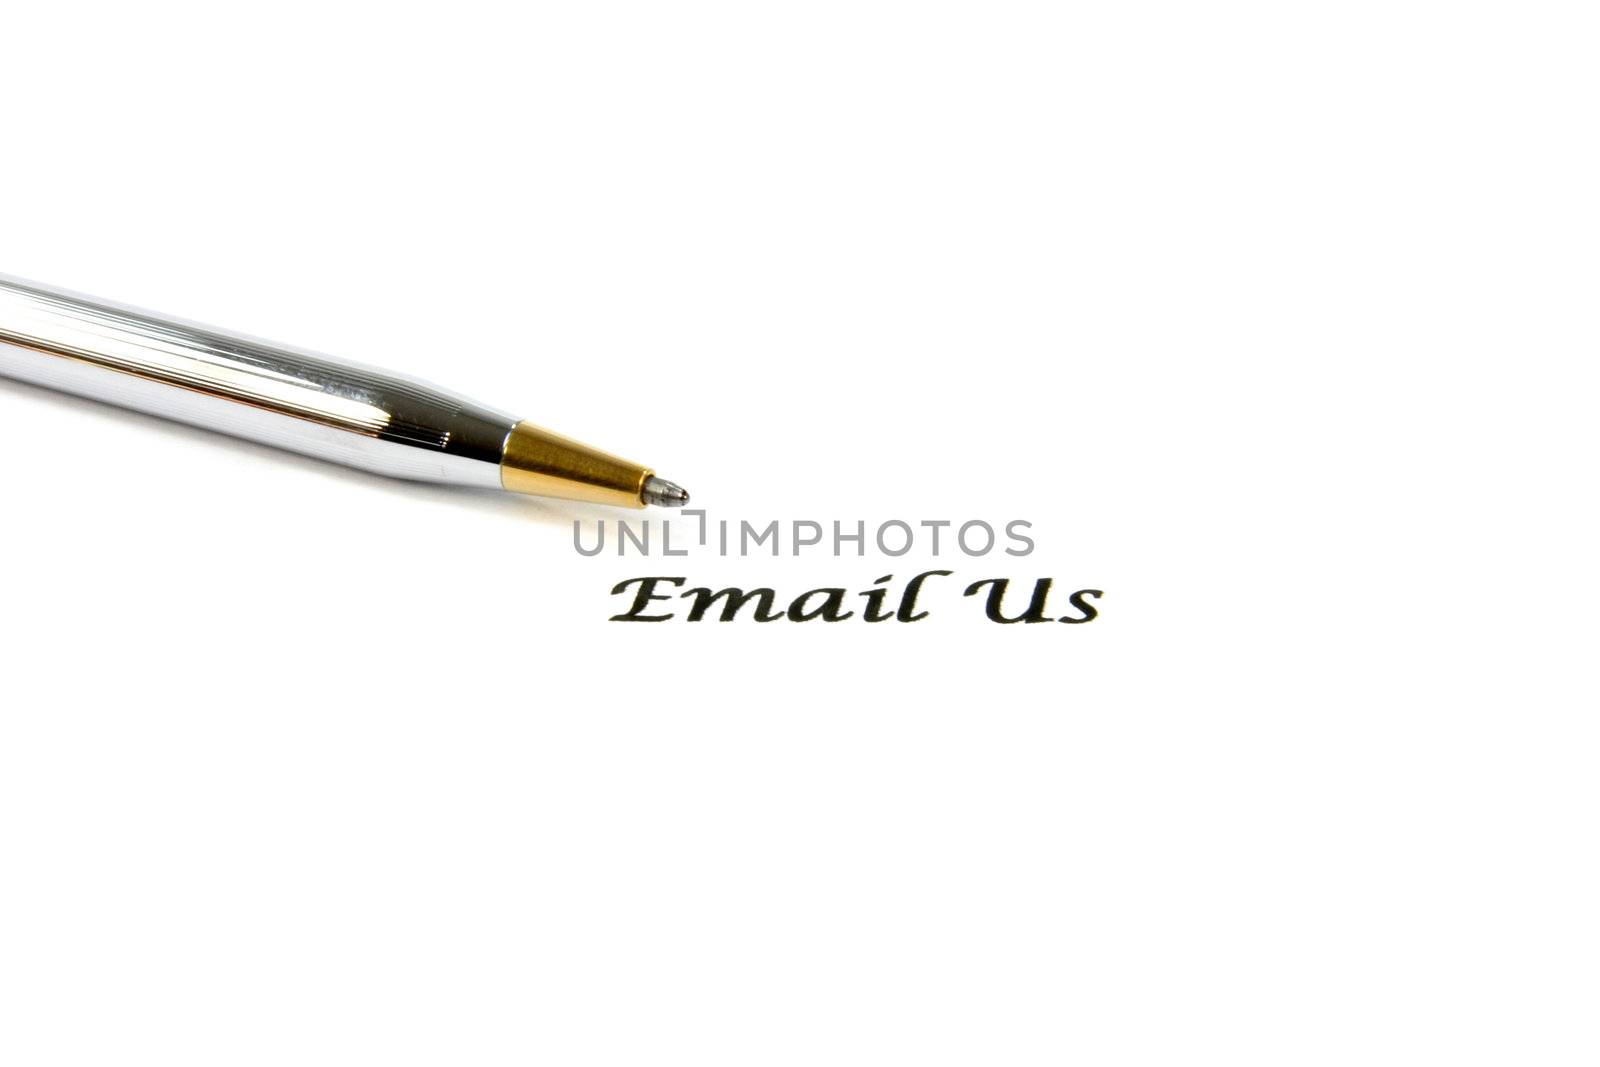 Contact Email Us Sign, with a pen